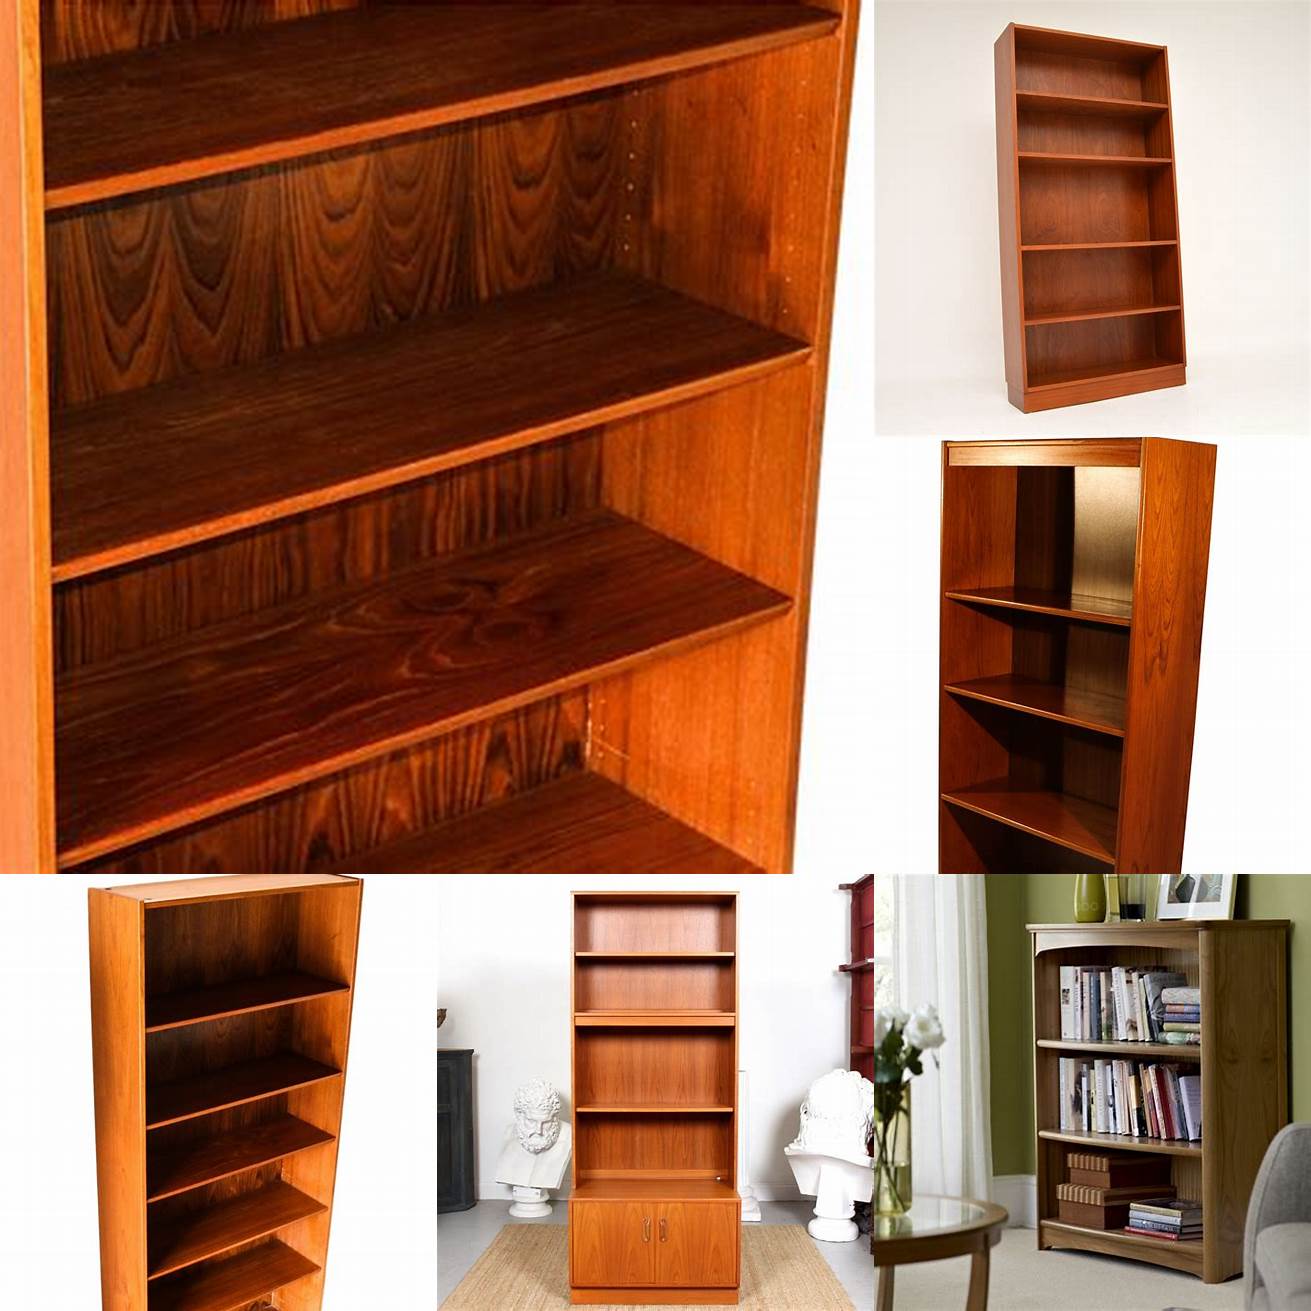 Teak Bookcases and Shelves